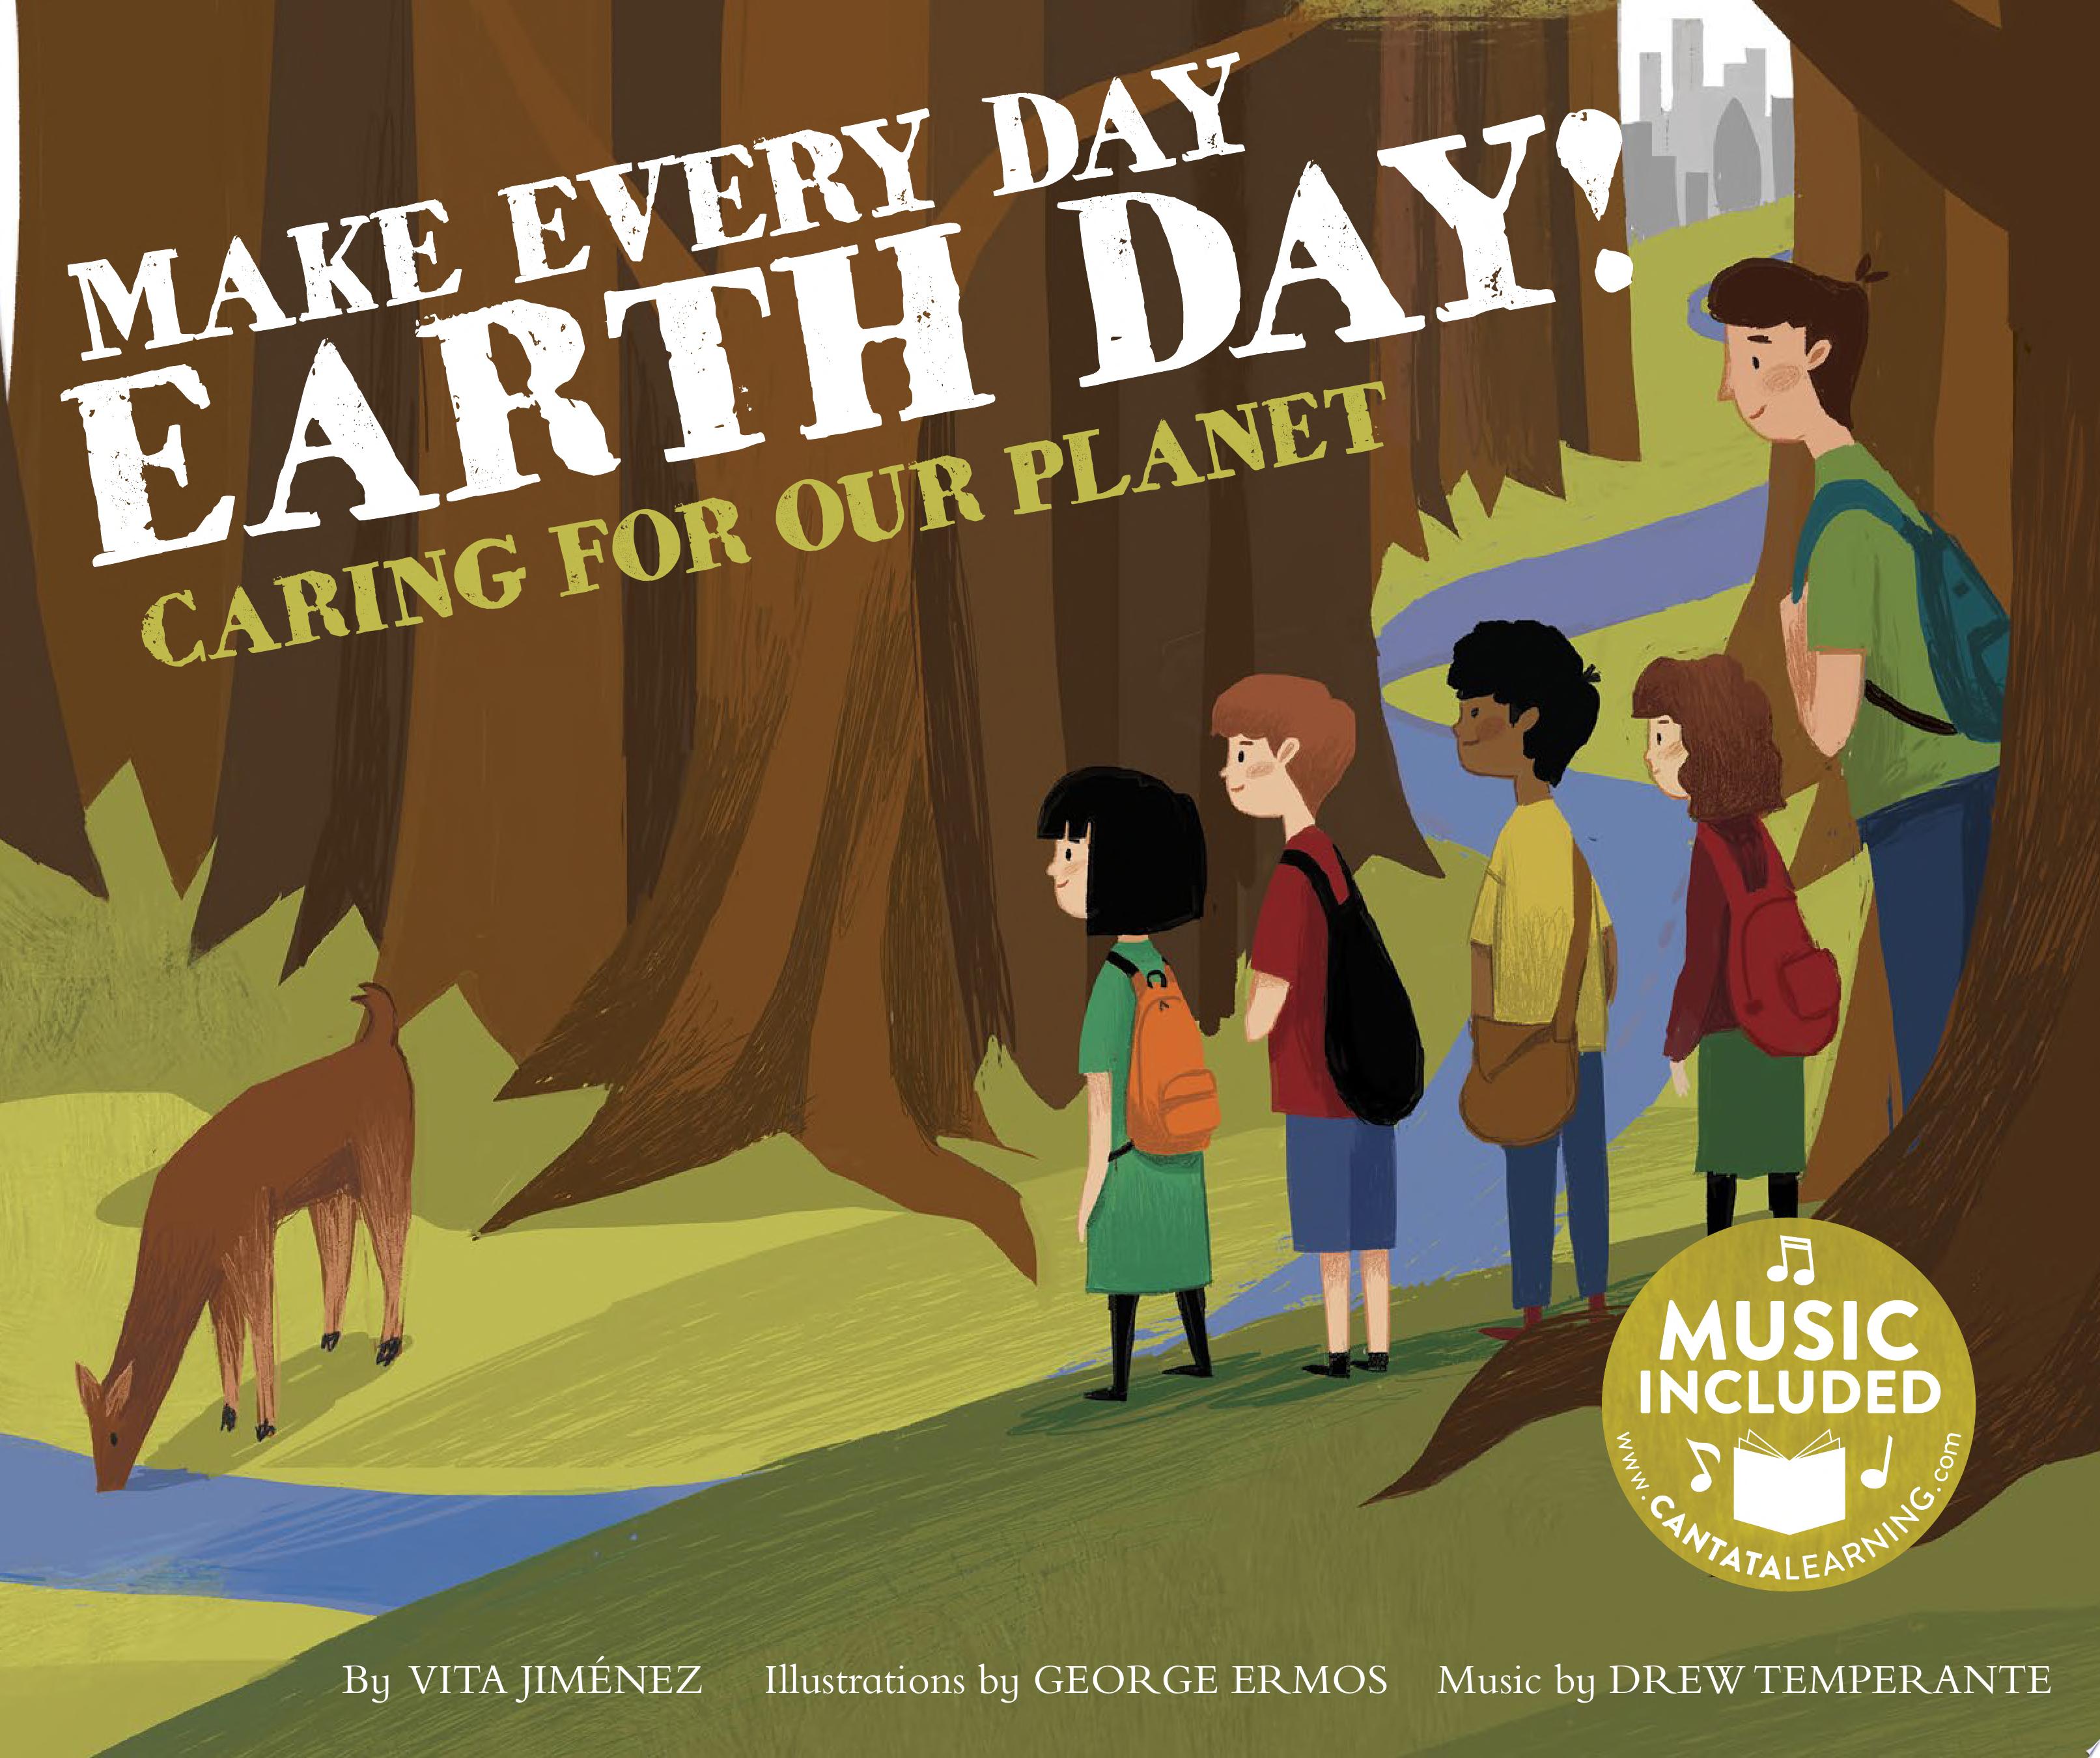 Image for "Make Every Day Earth Day!"